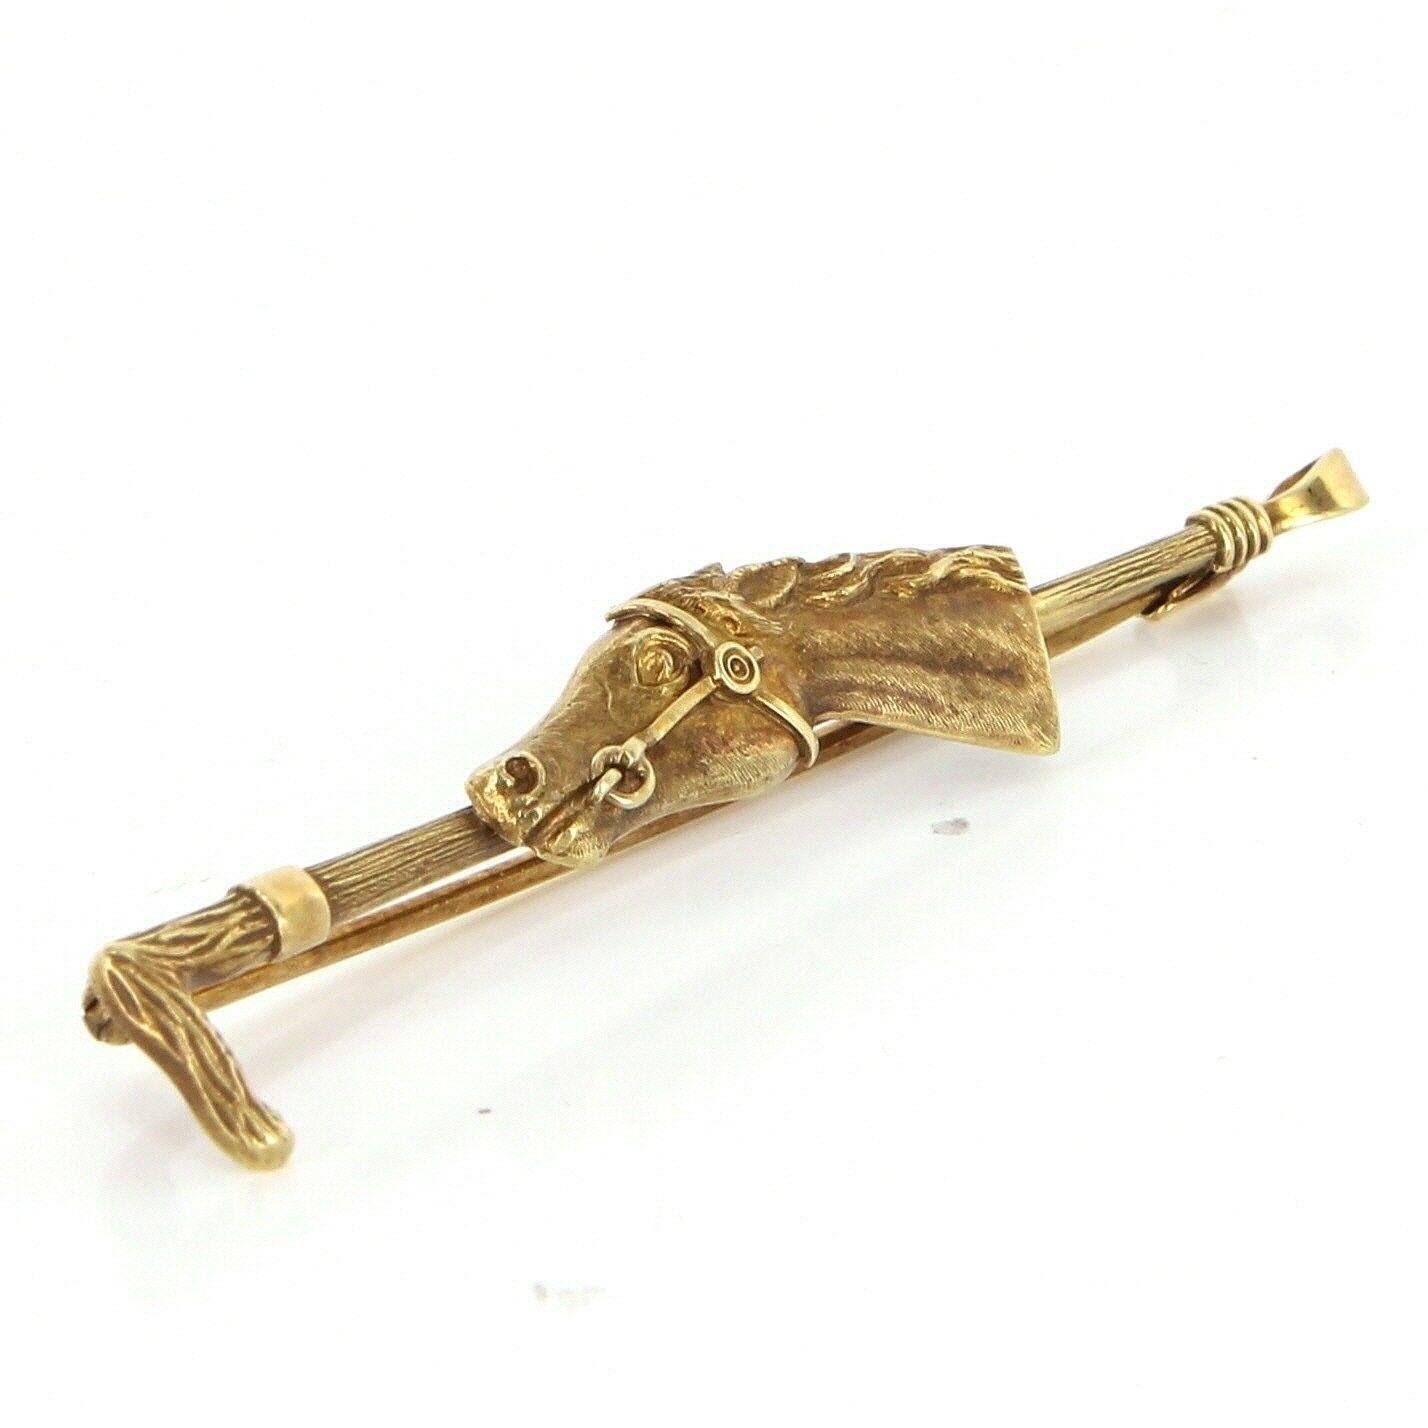 Offered for sale is a superb Victorian brooch (circa 1880s-1900s) , crafted beautifully in 14 karat yellow gold. 

The brooch features a riding horse (animal) with a crop whip.

The brooch measures 2 1/4 inches in length.

In very good original